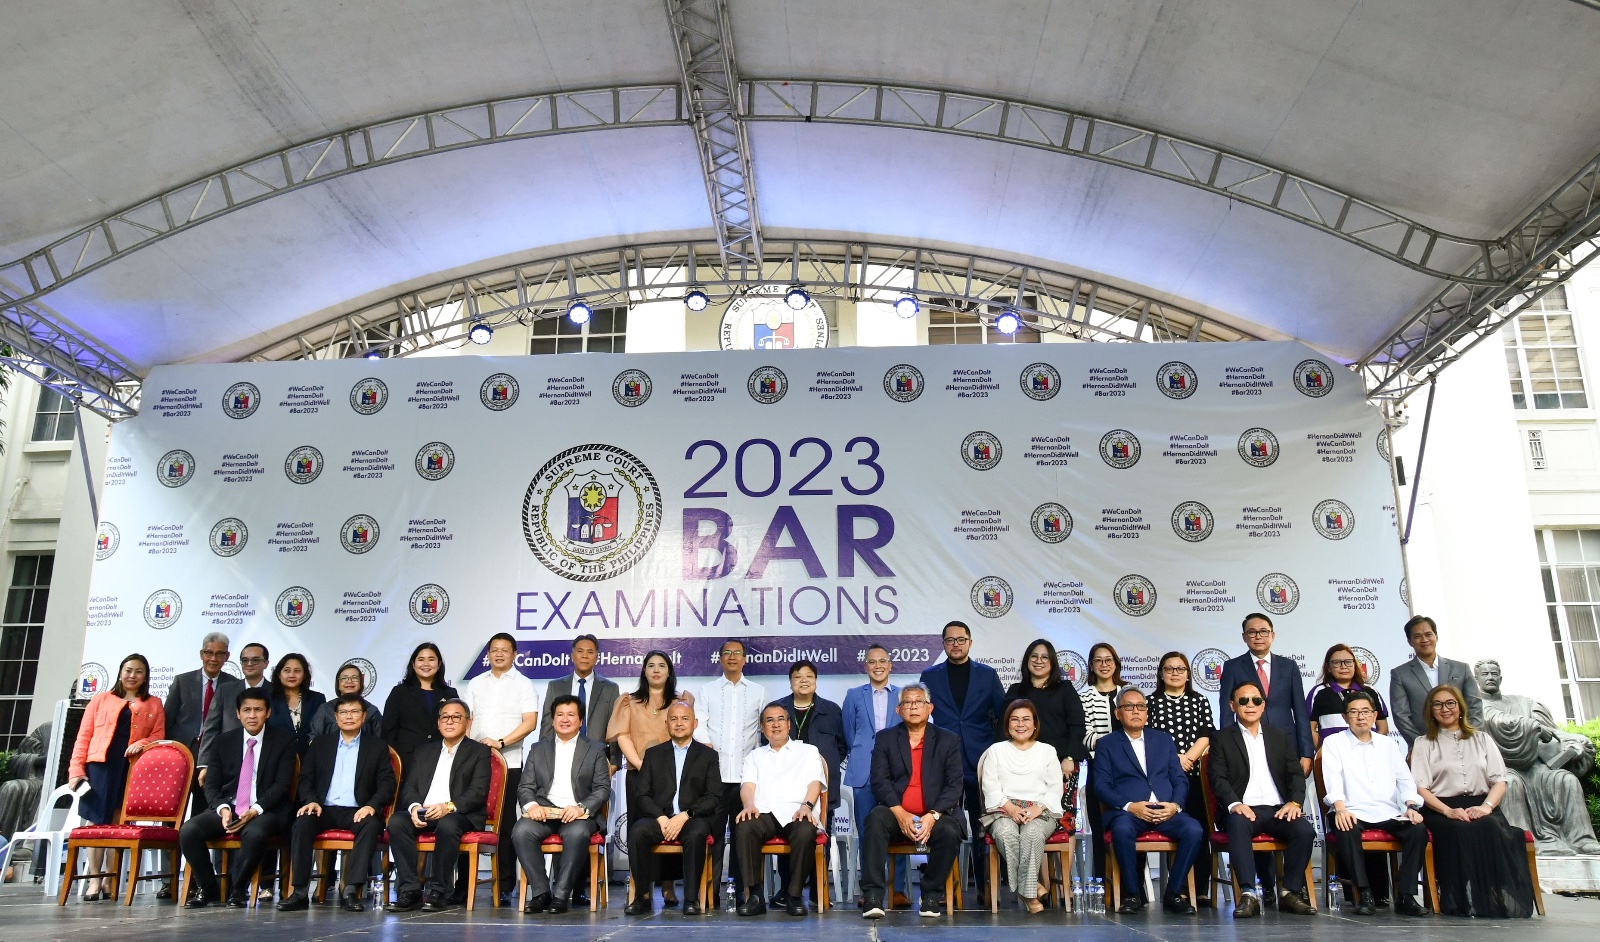 Ateneo de Manila University topped the law schools in the 2023 Bar Examination with over 100 candidates getting a 93.18 percent passing rate.